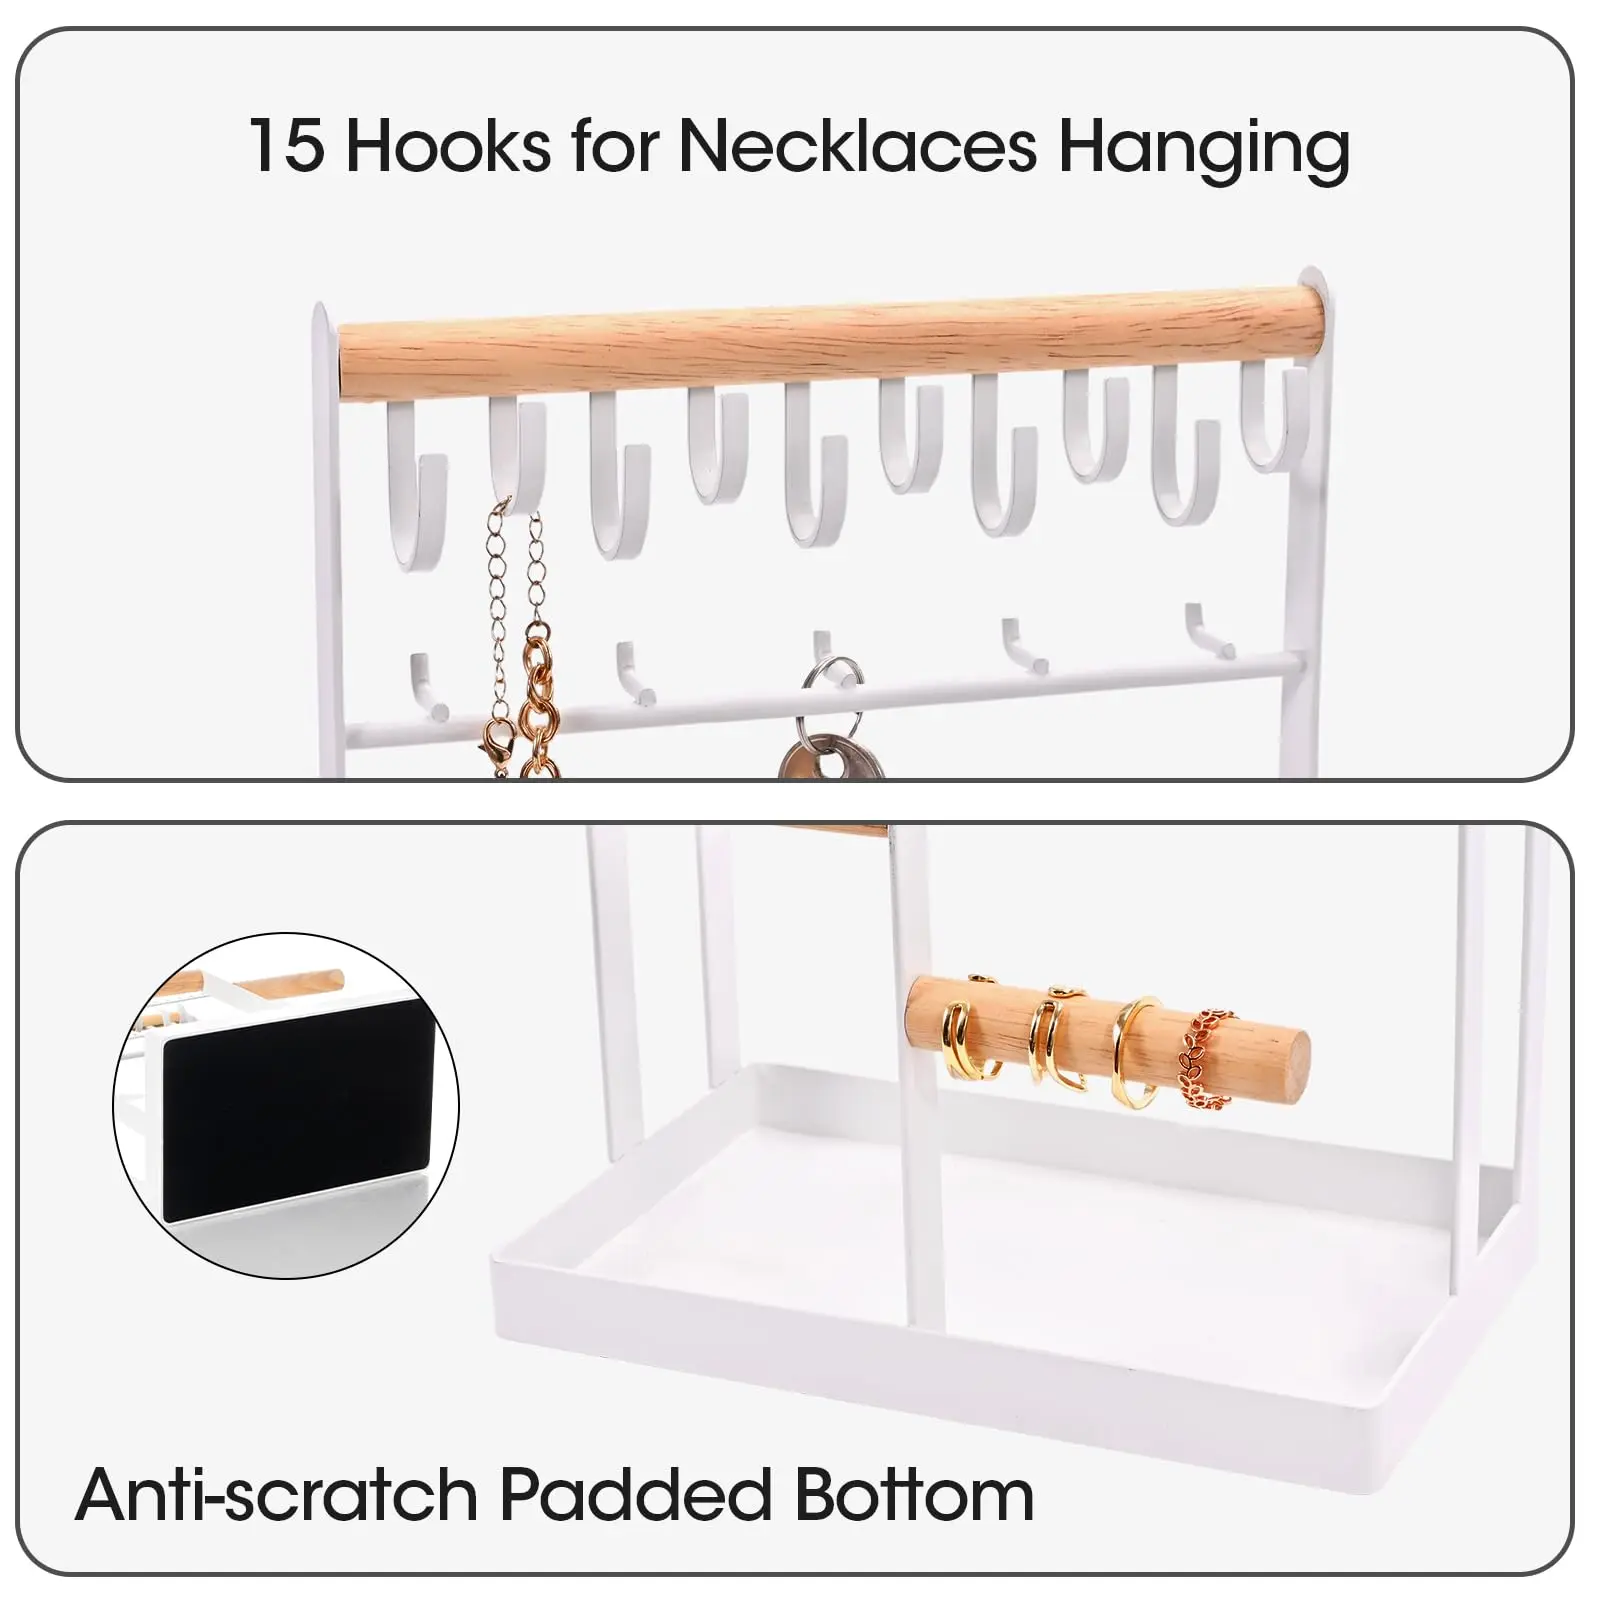 Jewelry Holder Organizer Necklace Stand  Jewelry Rack Necklace Holder with 15 Hooks and Bottom Tray